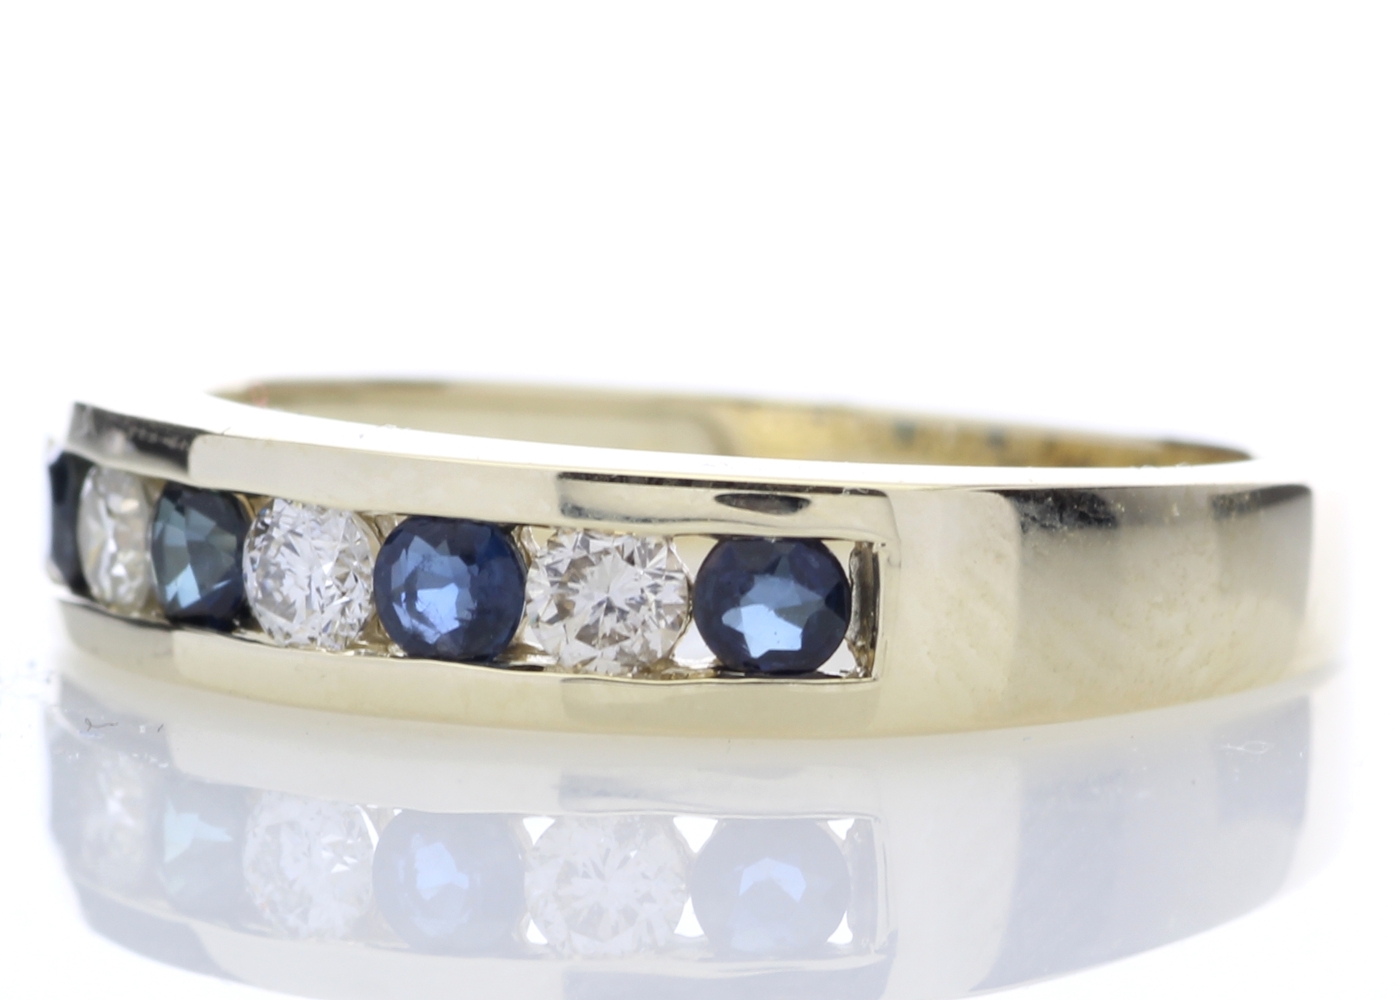 9ct Yellow Gold Channel Set Semi Eternity Diamond Ring (S 0.30) 0.25 Carats - Valued By GIE £2,945. - Image 2 of 5